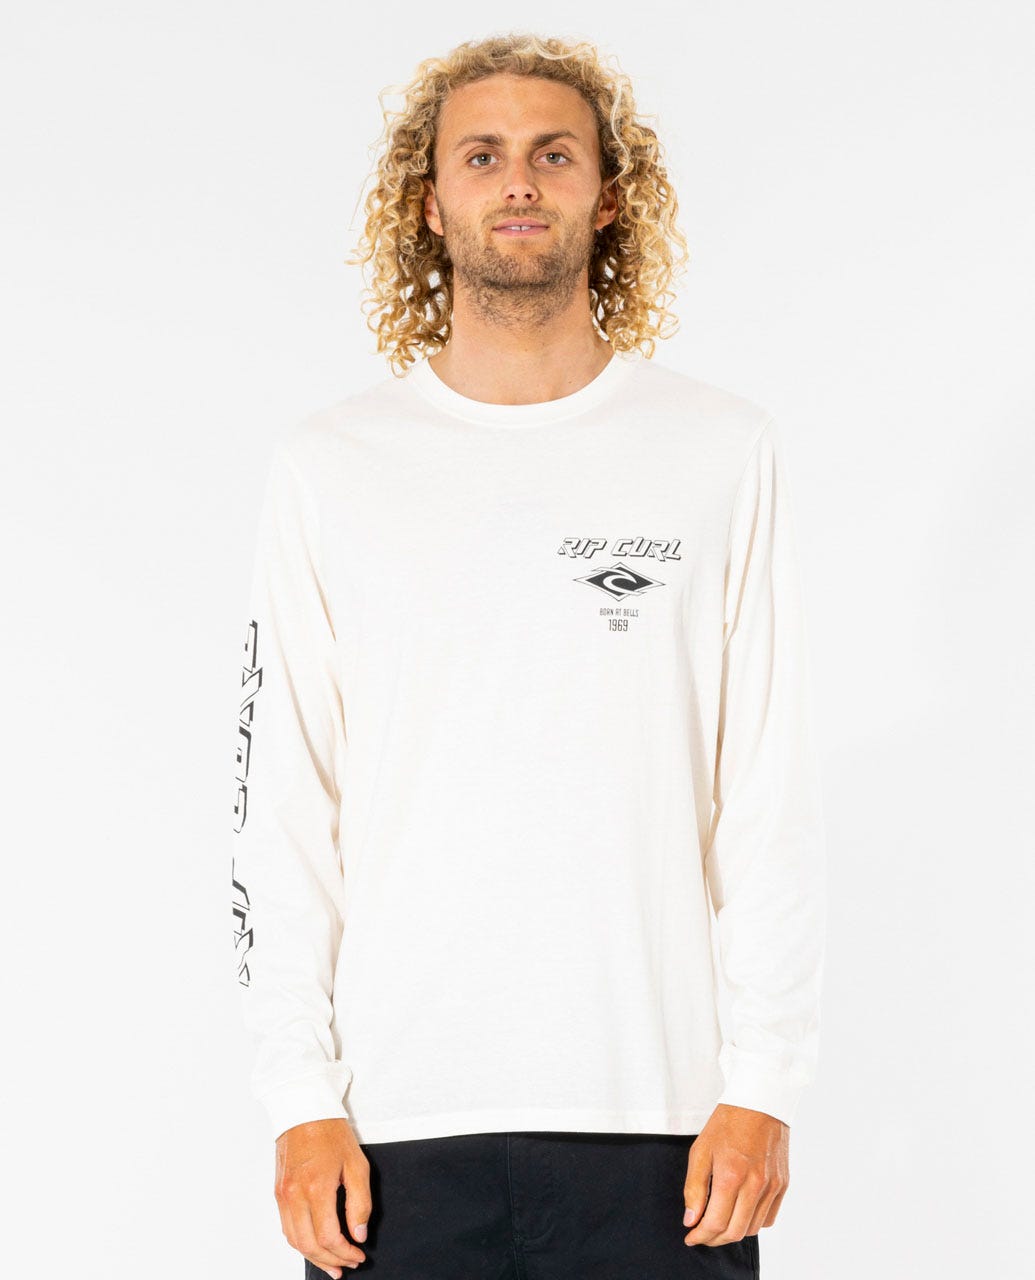 RIP CURL FADE OUT ICON L/S CTEVY9-3021 T-SHIRT LONG SLEEVE (M)